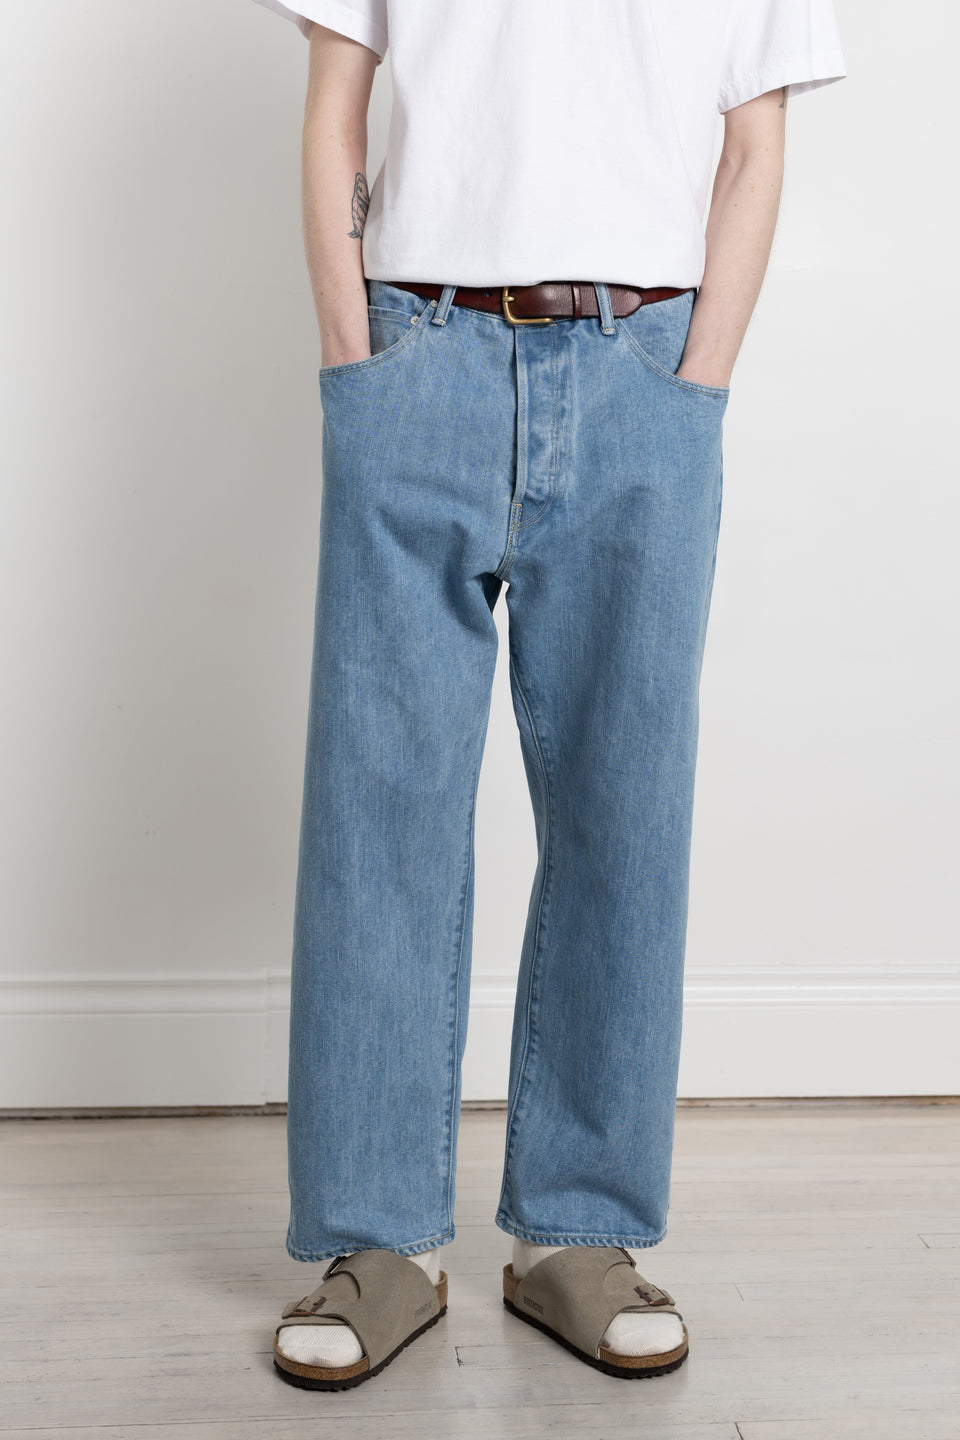 HATSKI Made in Japan 24SS Men's Collection Wide Tapered Selvedge Denim Used / Ice Blue Calculus Victoria BC Canada